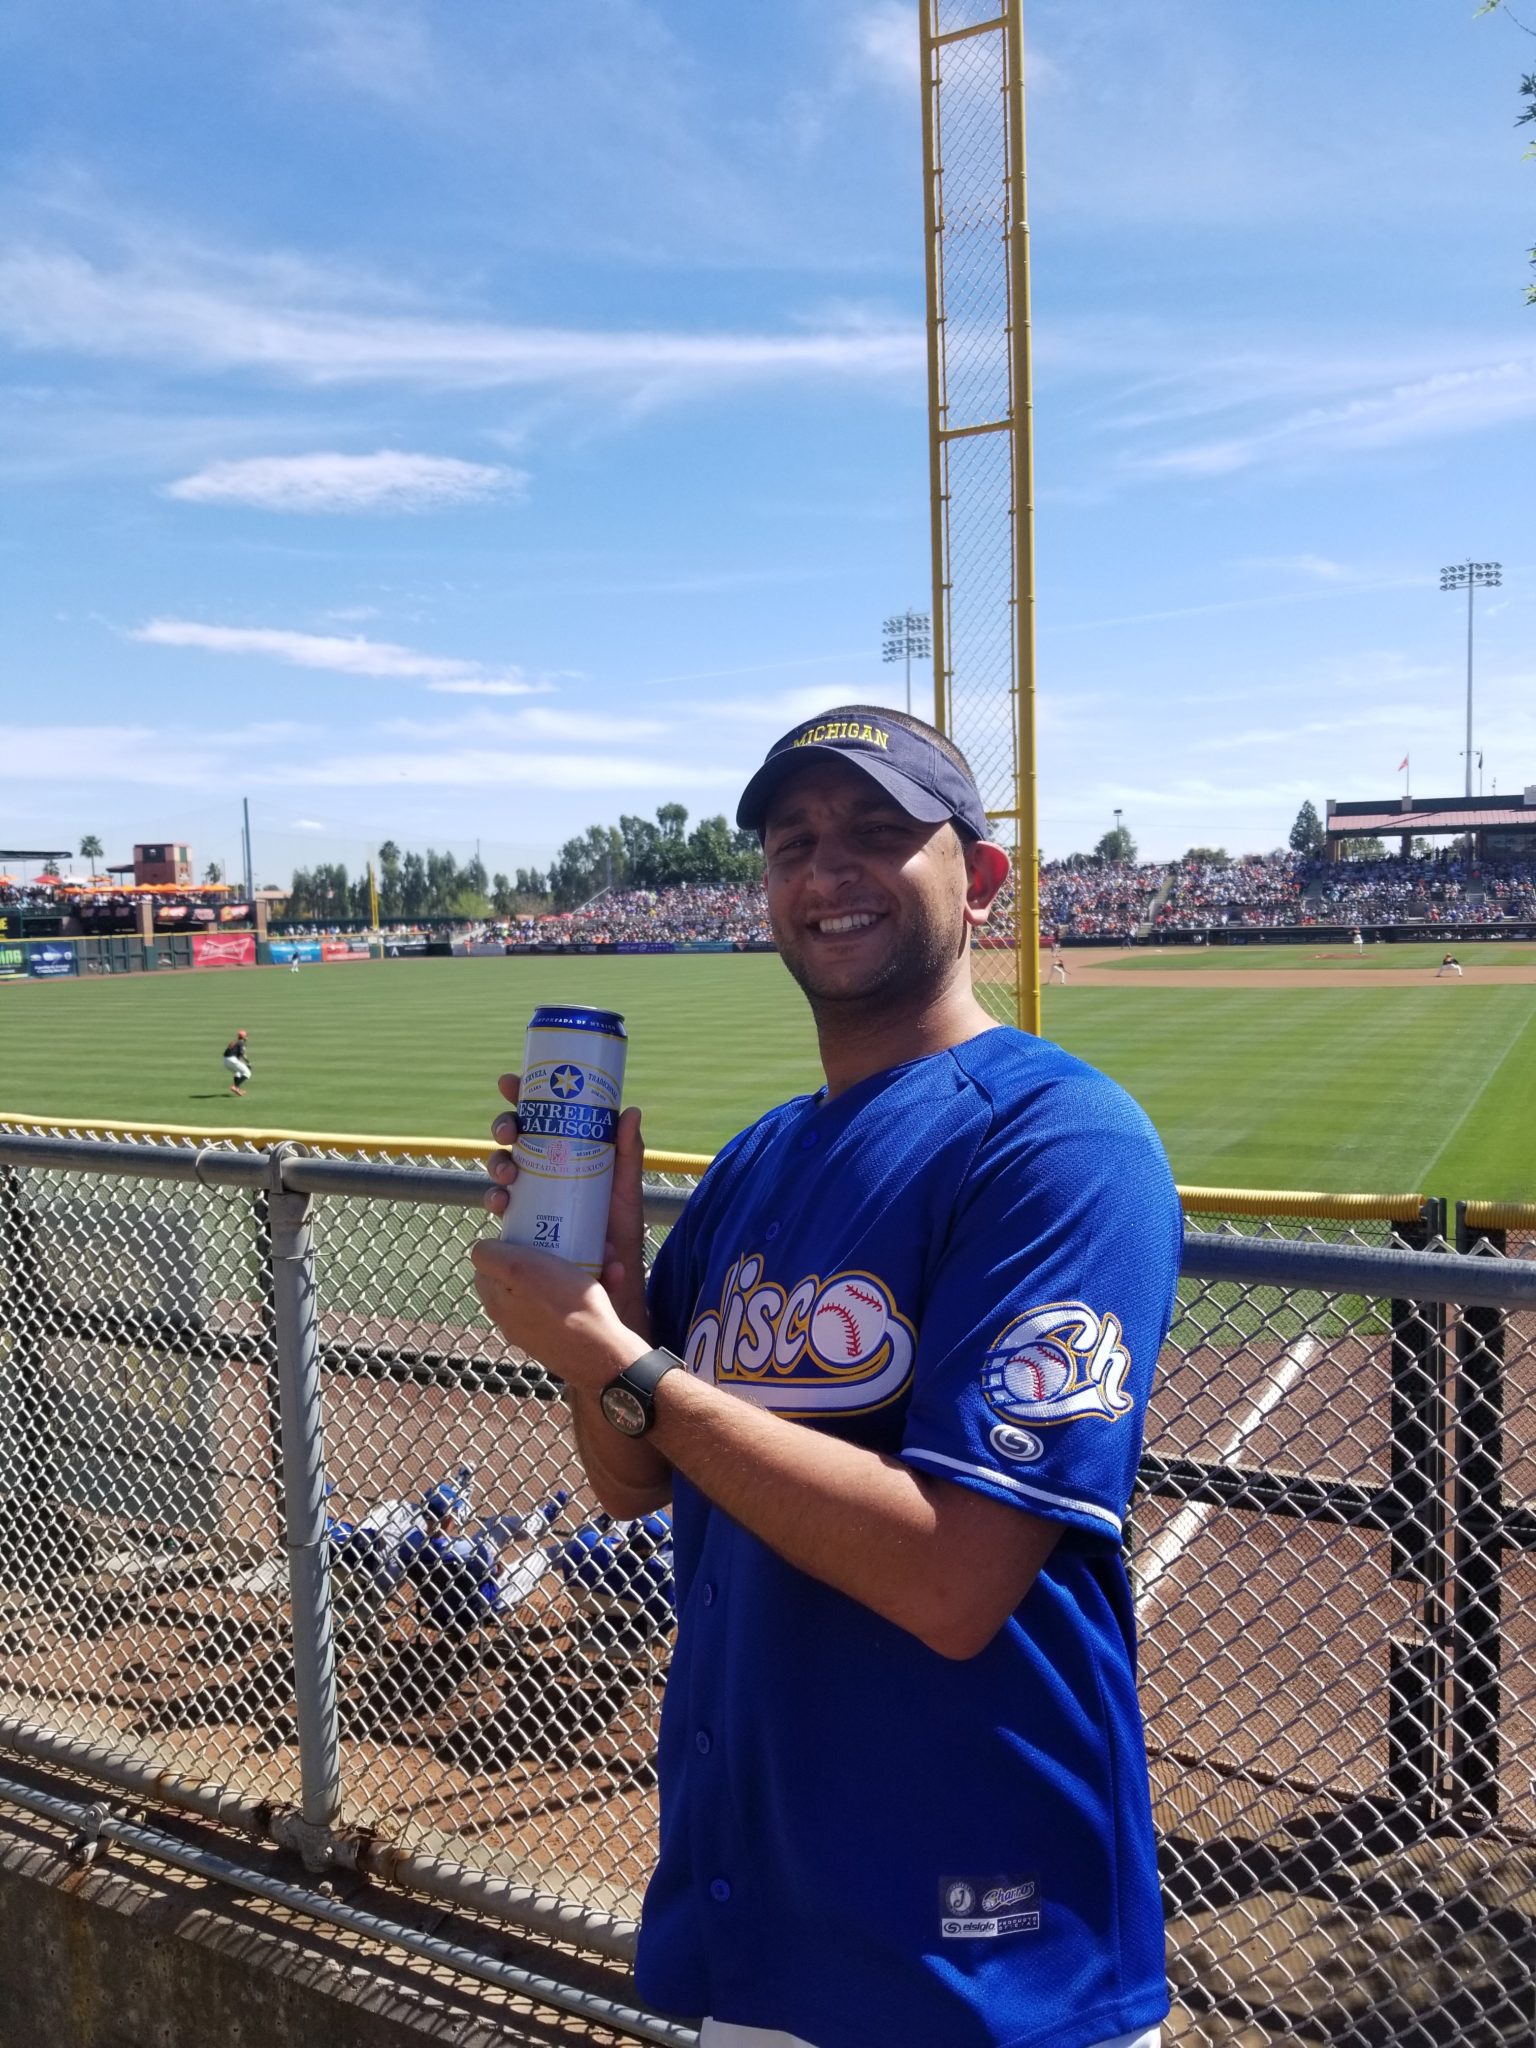 a man holding a can of water in front of a baseball field